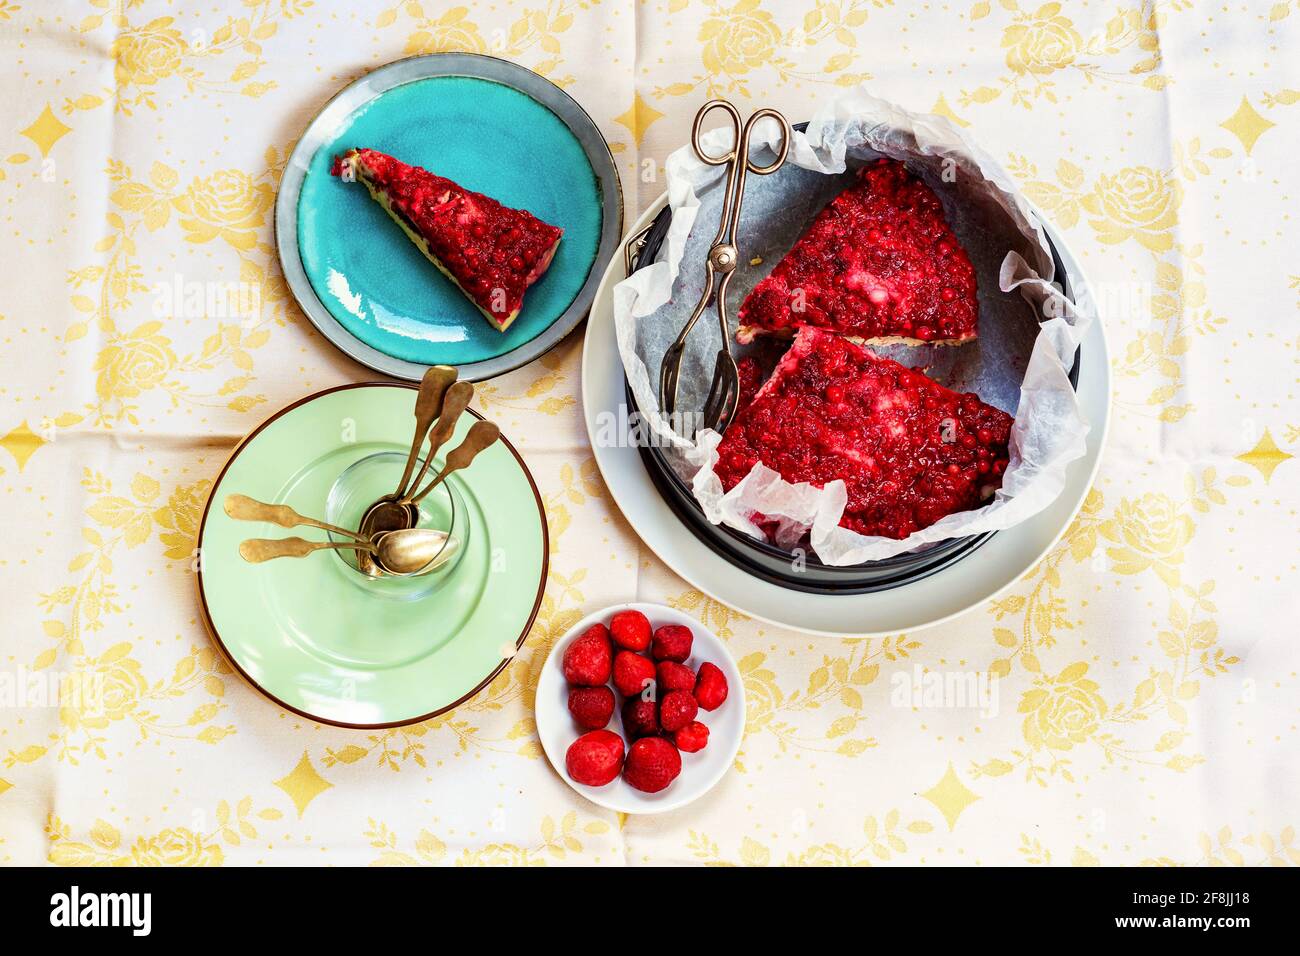 Overhead view on table with plate and cake form with red fruit cakes, empty dirty plate with spoons, strawberries on small plate. Stock Photo